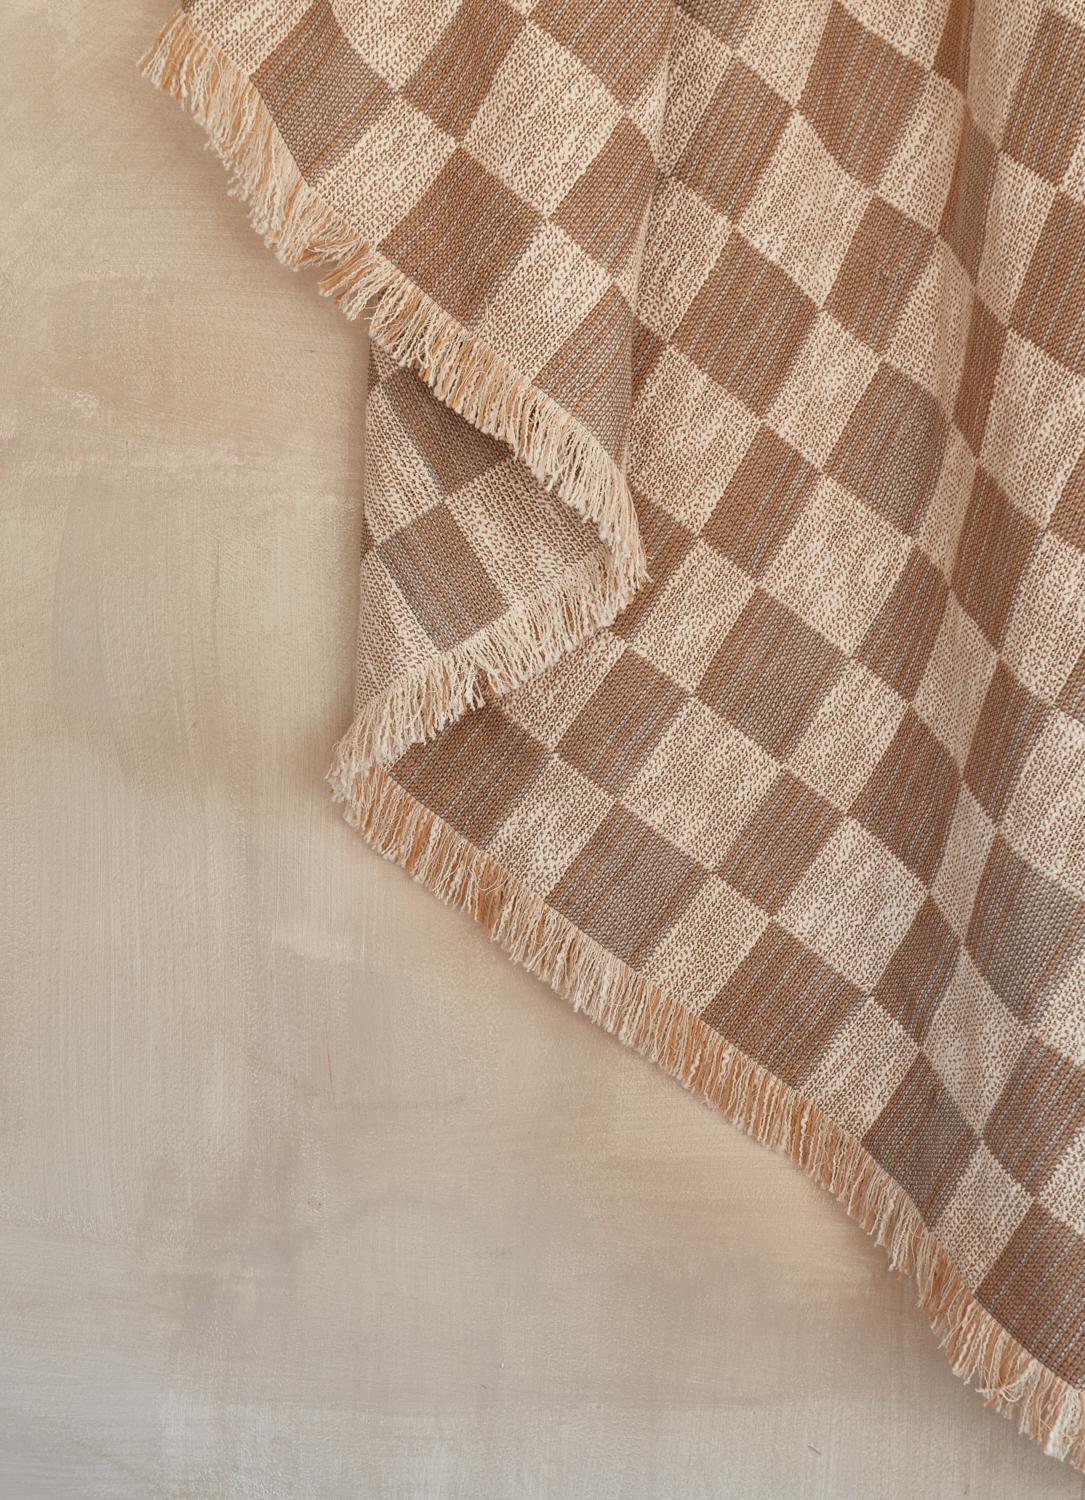 The 'Mariana' bedspread is designed by Folk Textiles—a LA based brand dedicated to thoughtful living. This textile is woven in the UK using sustainably-dyed organic cotton from Italy. 

The 'Mariana' pattern in particular is inspired by oceanic